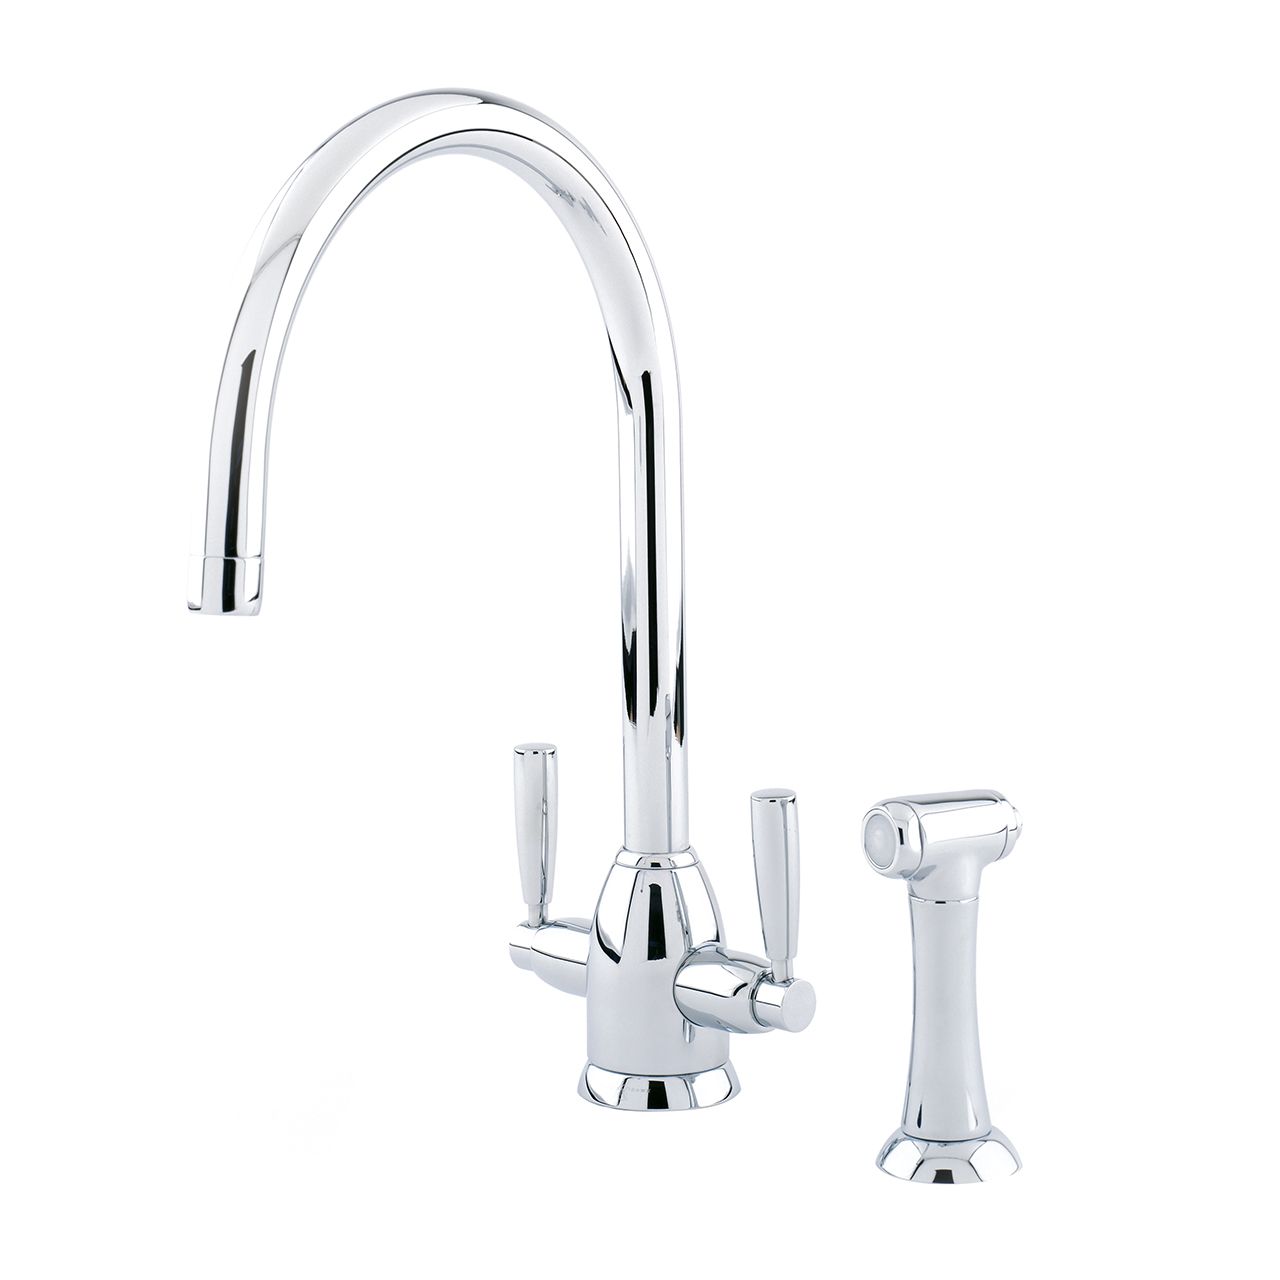 Langbourn Monobloc tap with C Spout & Rinse Chrome – Perrin & Rowe